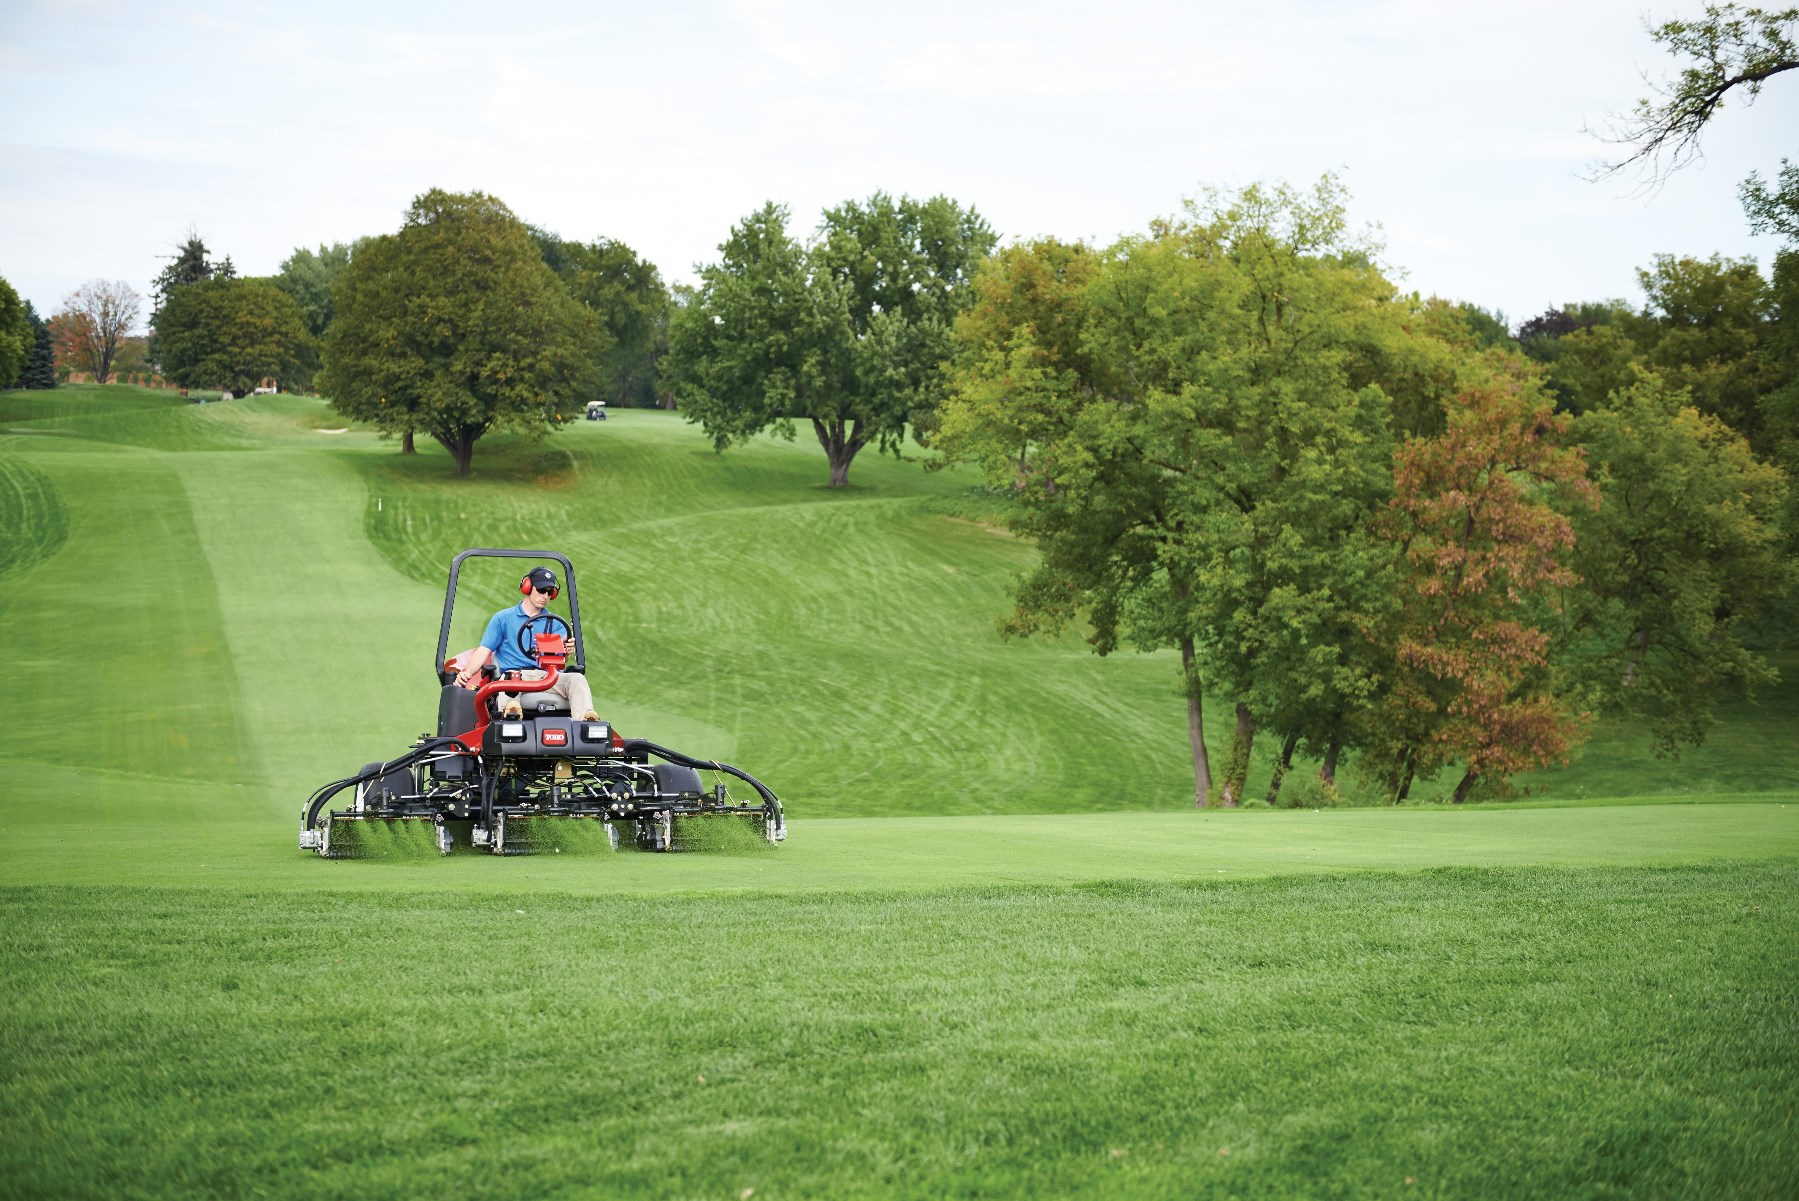 Lightweight design and powerful performance - new Toro Reelmaster® 3555-D and 3575-D